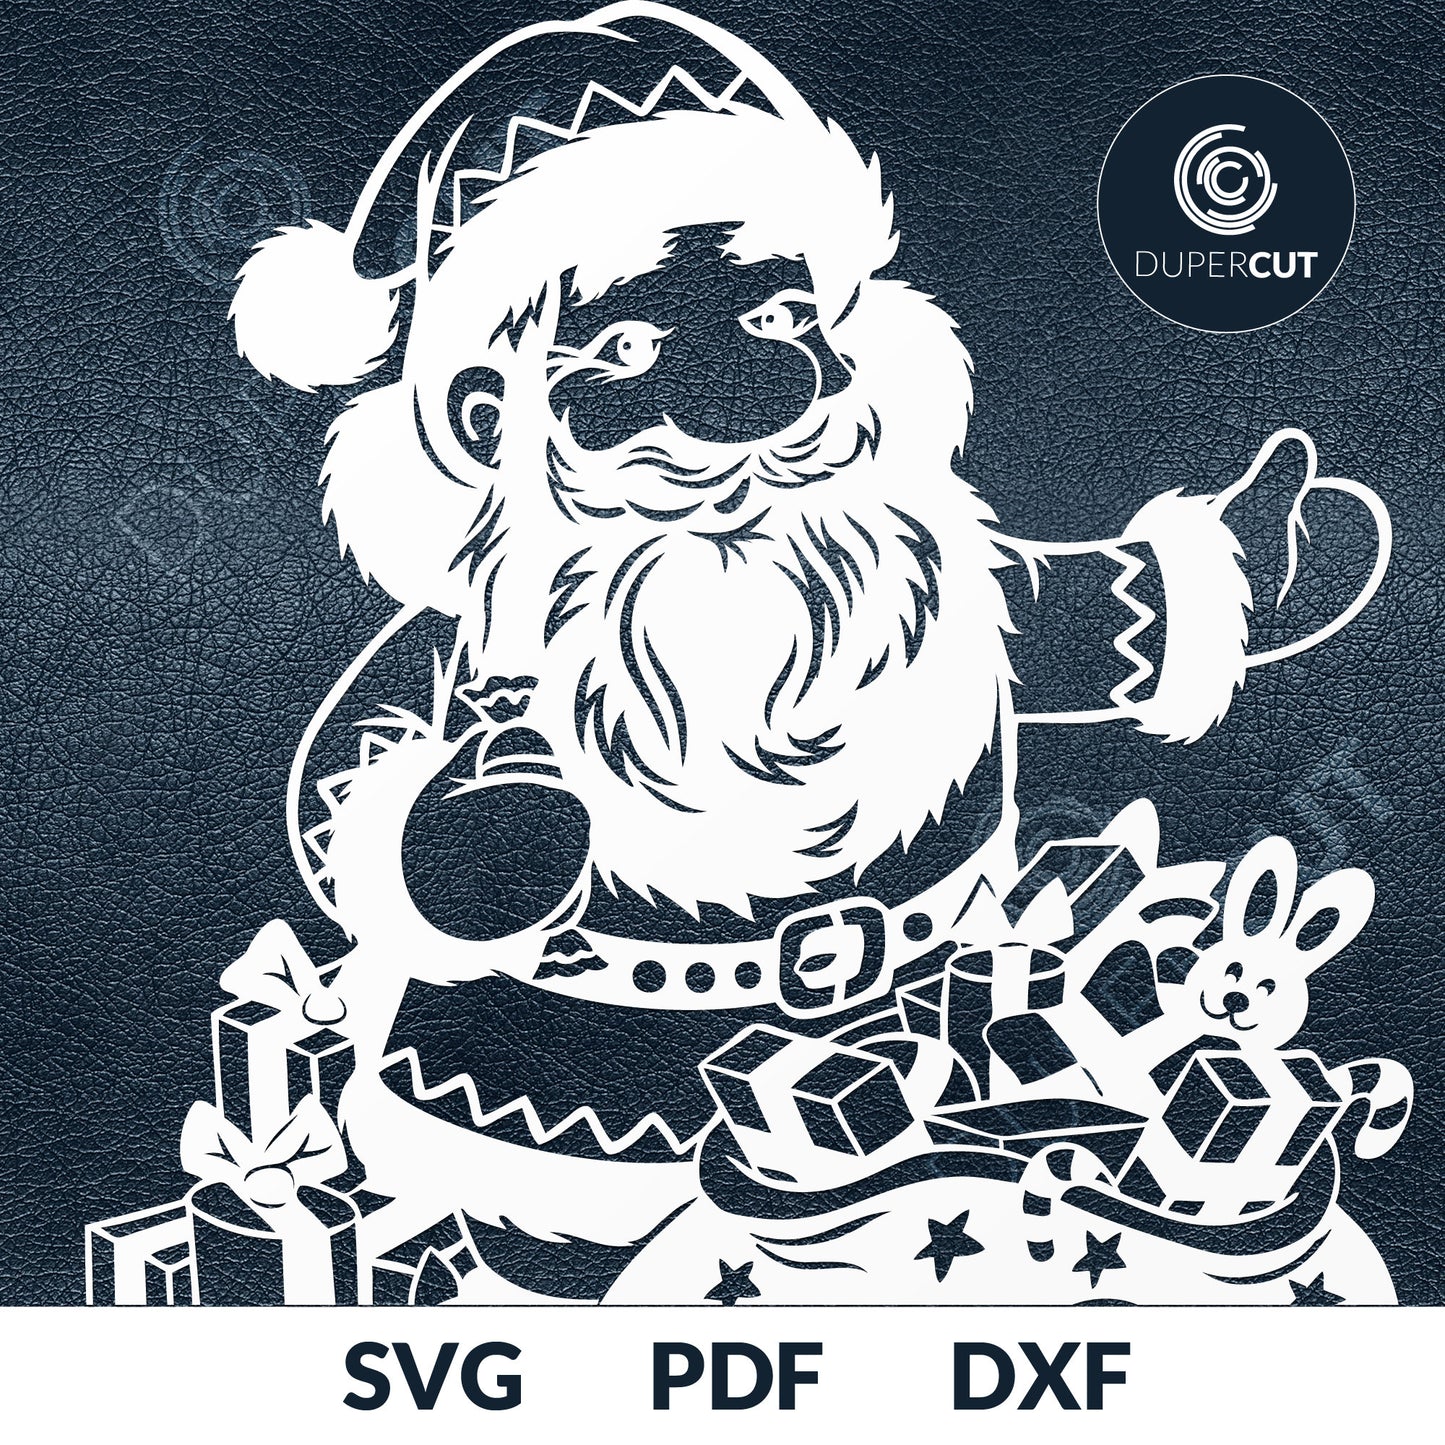 Santa with gifts, window decor. SVG PNG DXF cutting files for Cricut, Silhouette, Glowforge, print on demand, sublimation templates